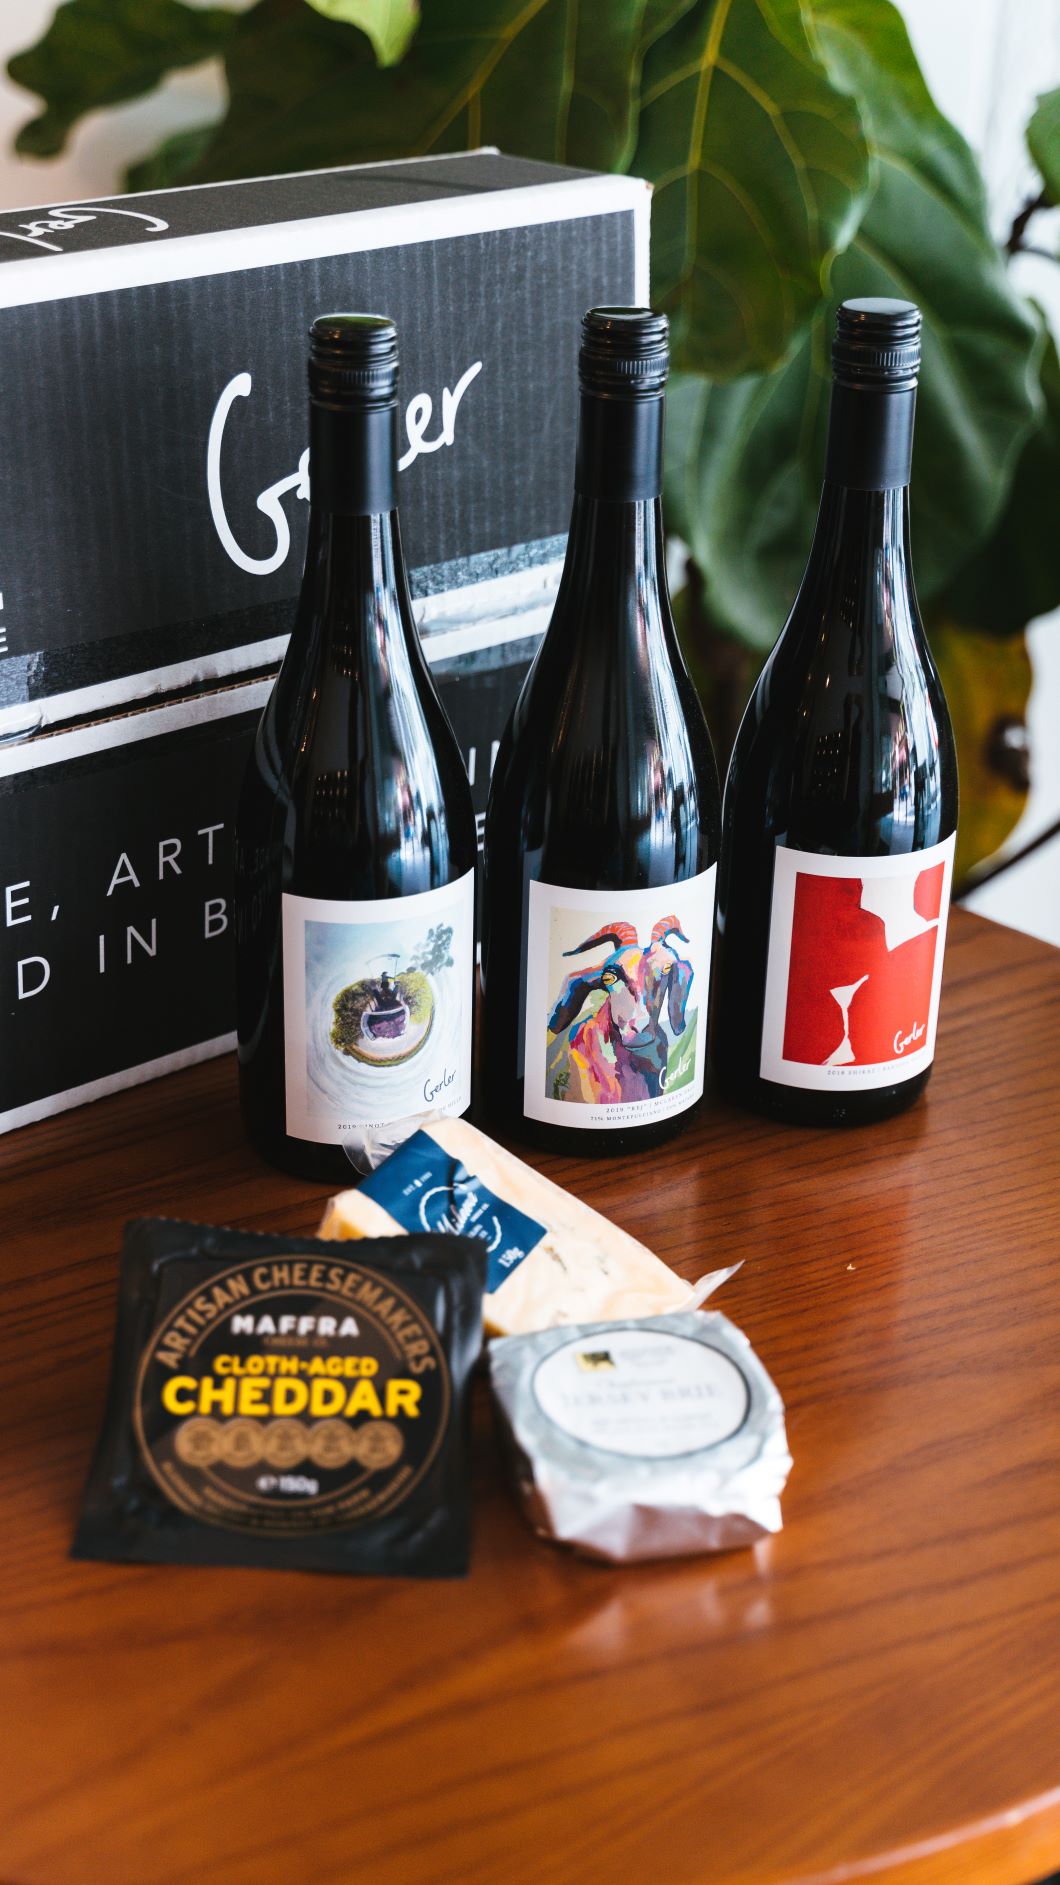 Wine and Cheese Pairing Experience for 2-4 people (ITO)